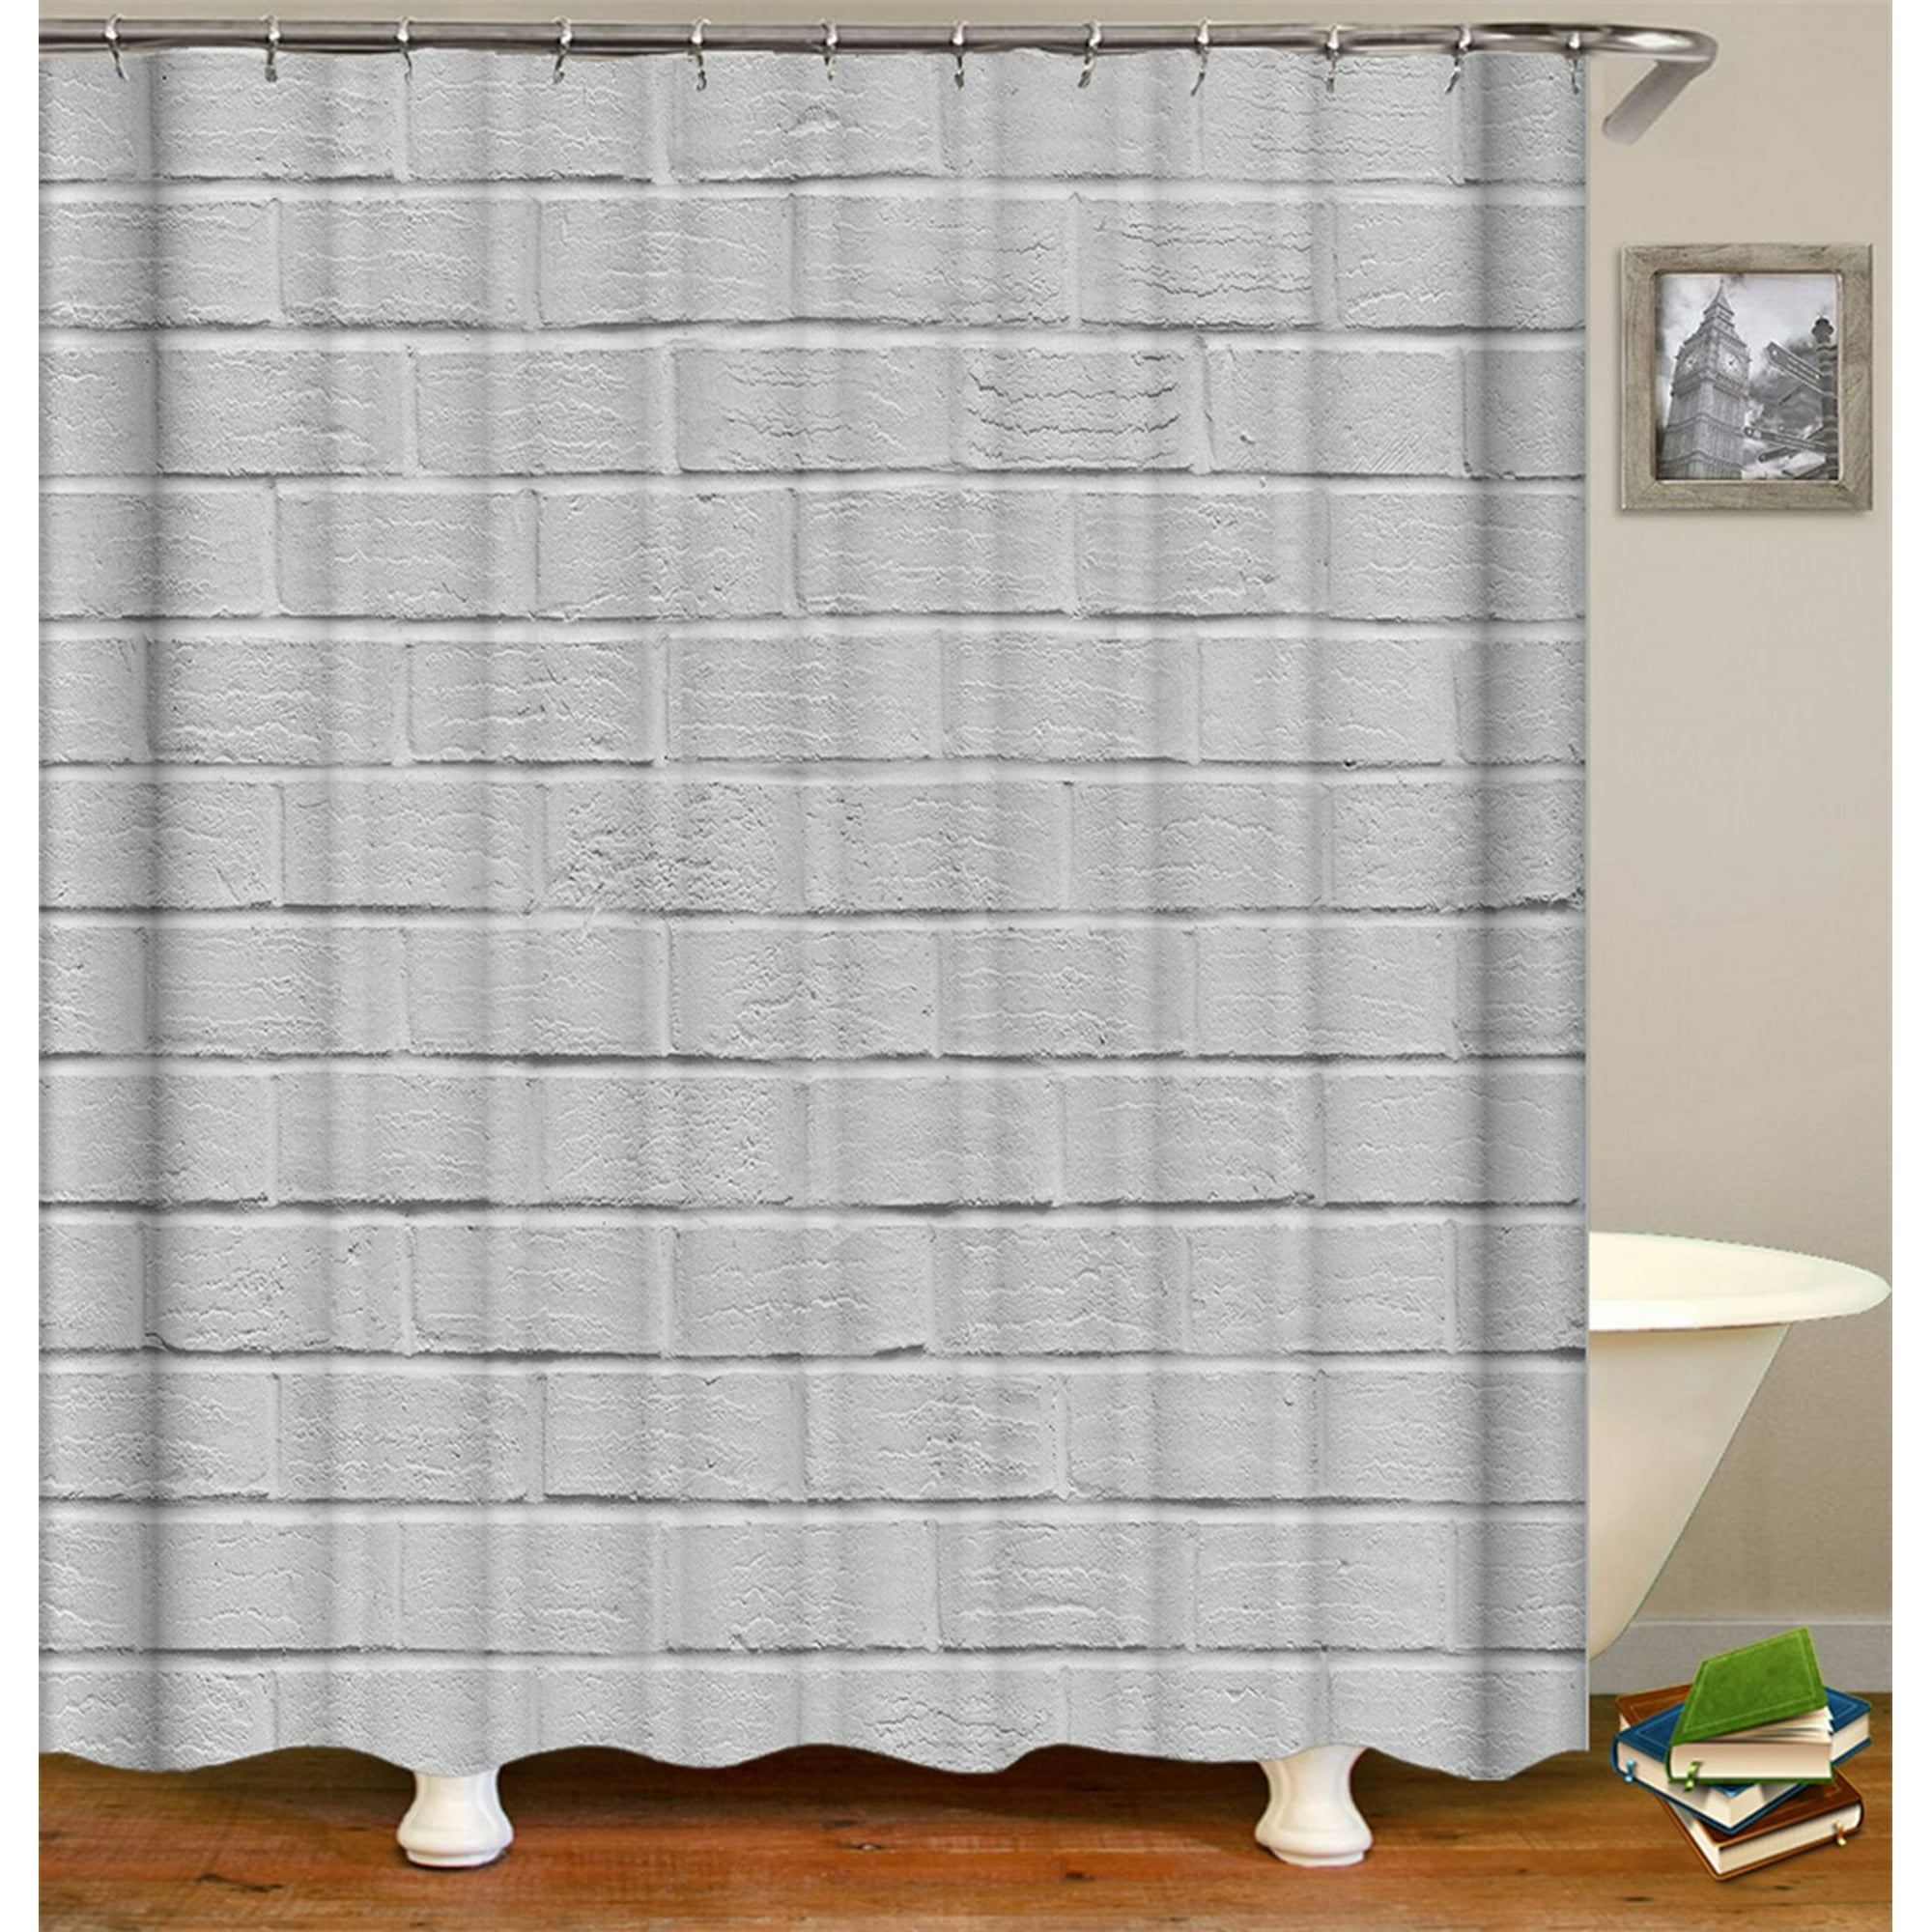 Shower Curtain Set With Hooks Grey Old, Brick Pattern Shower Curtain